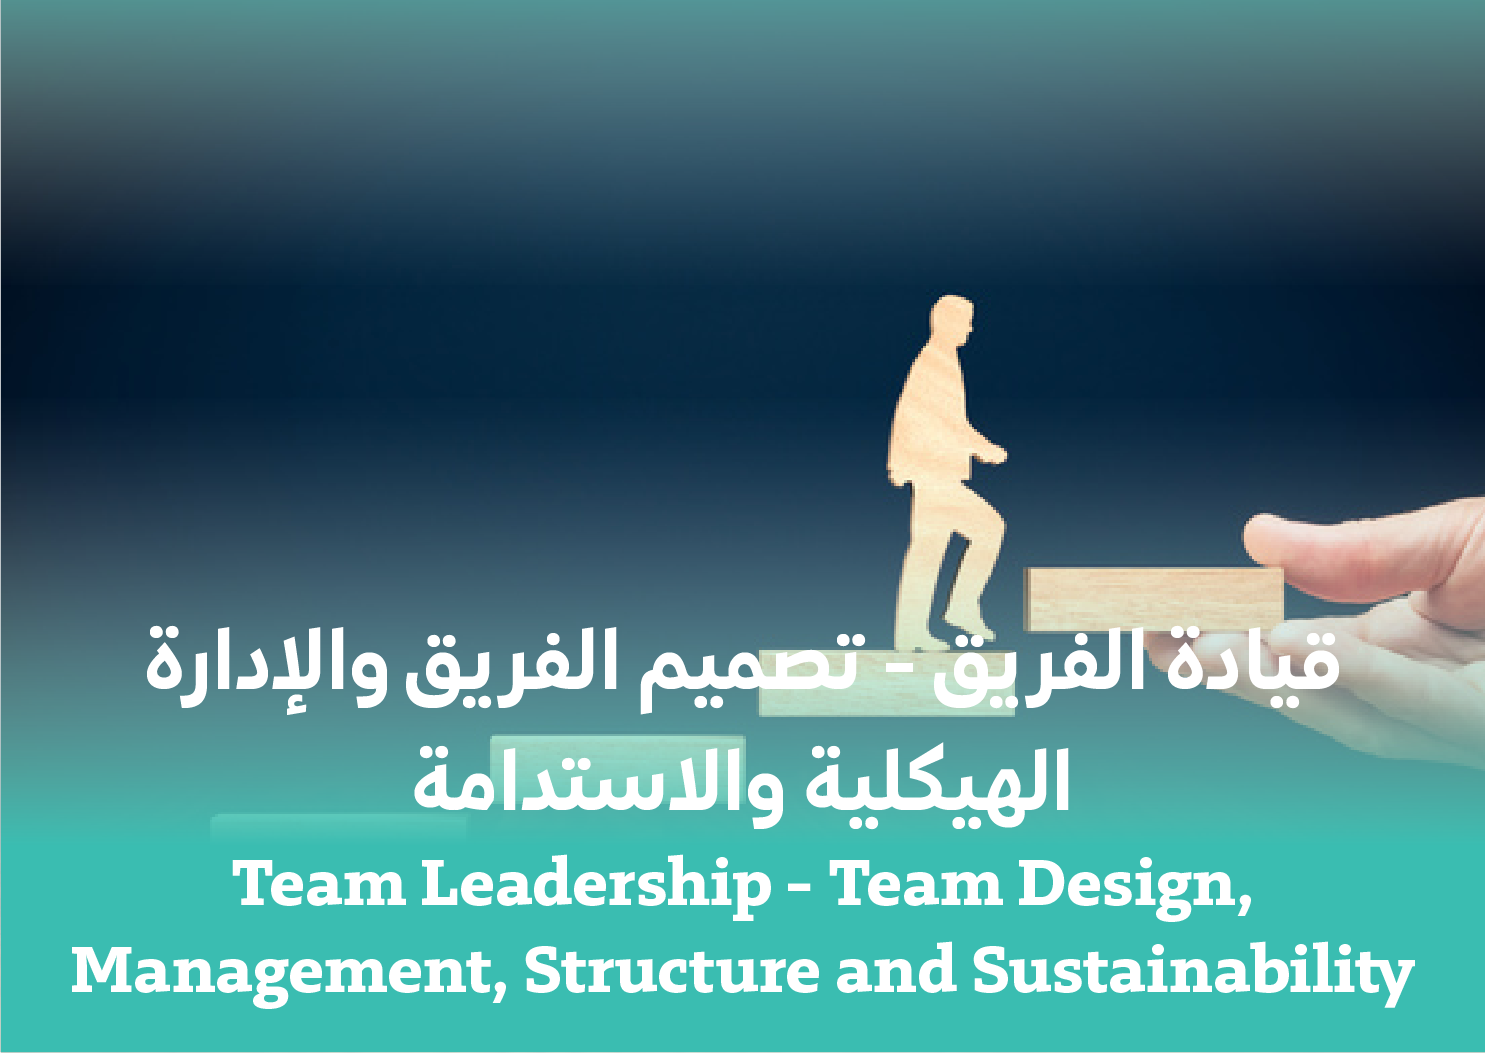 Team Leadership - Team Design, Management, Structure and Sustainability